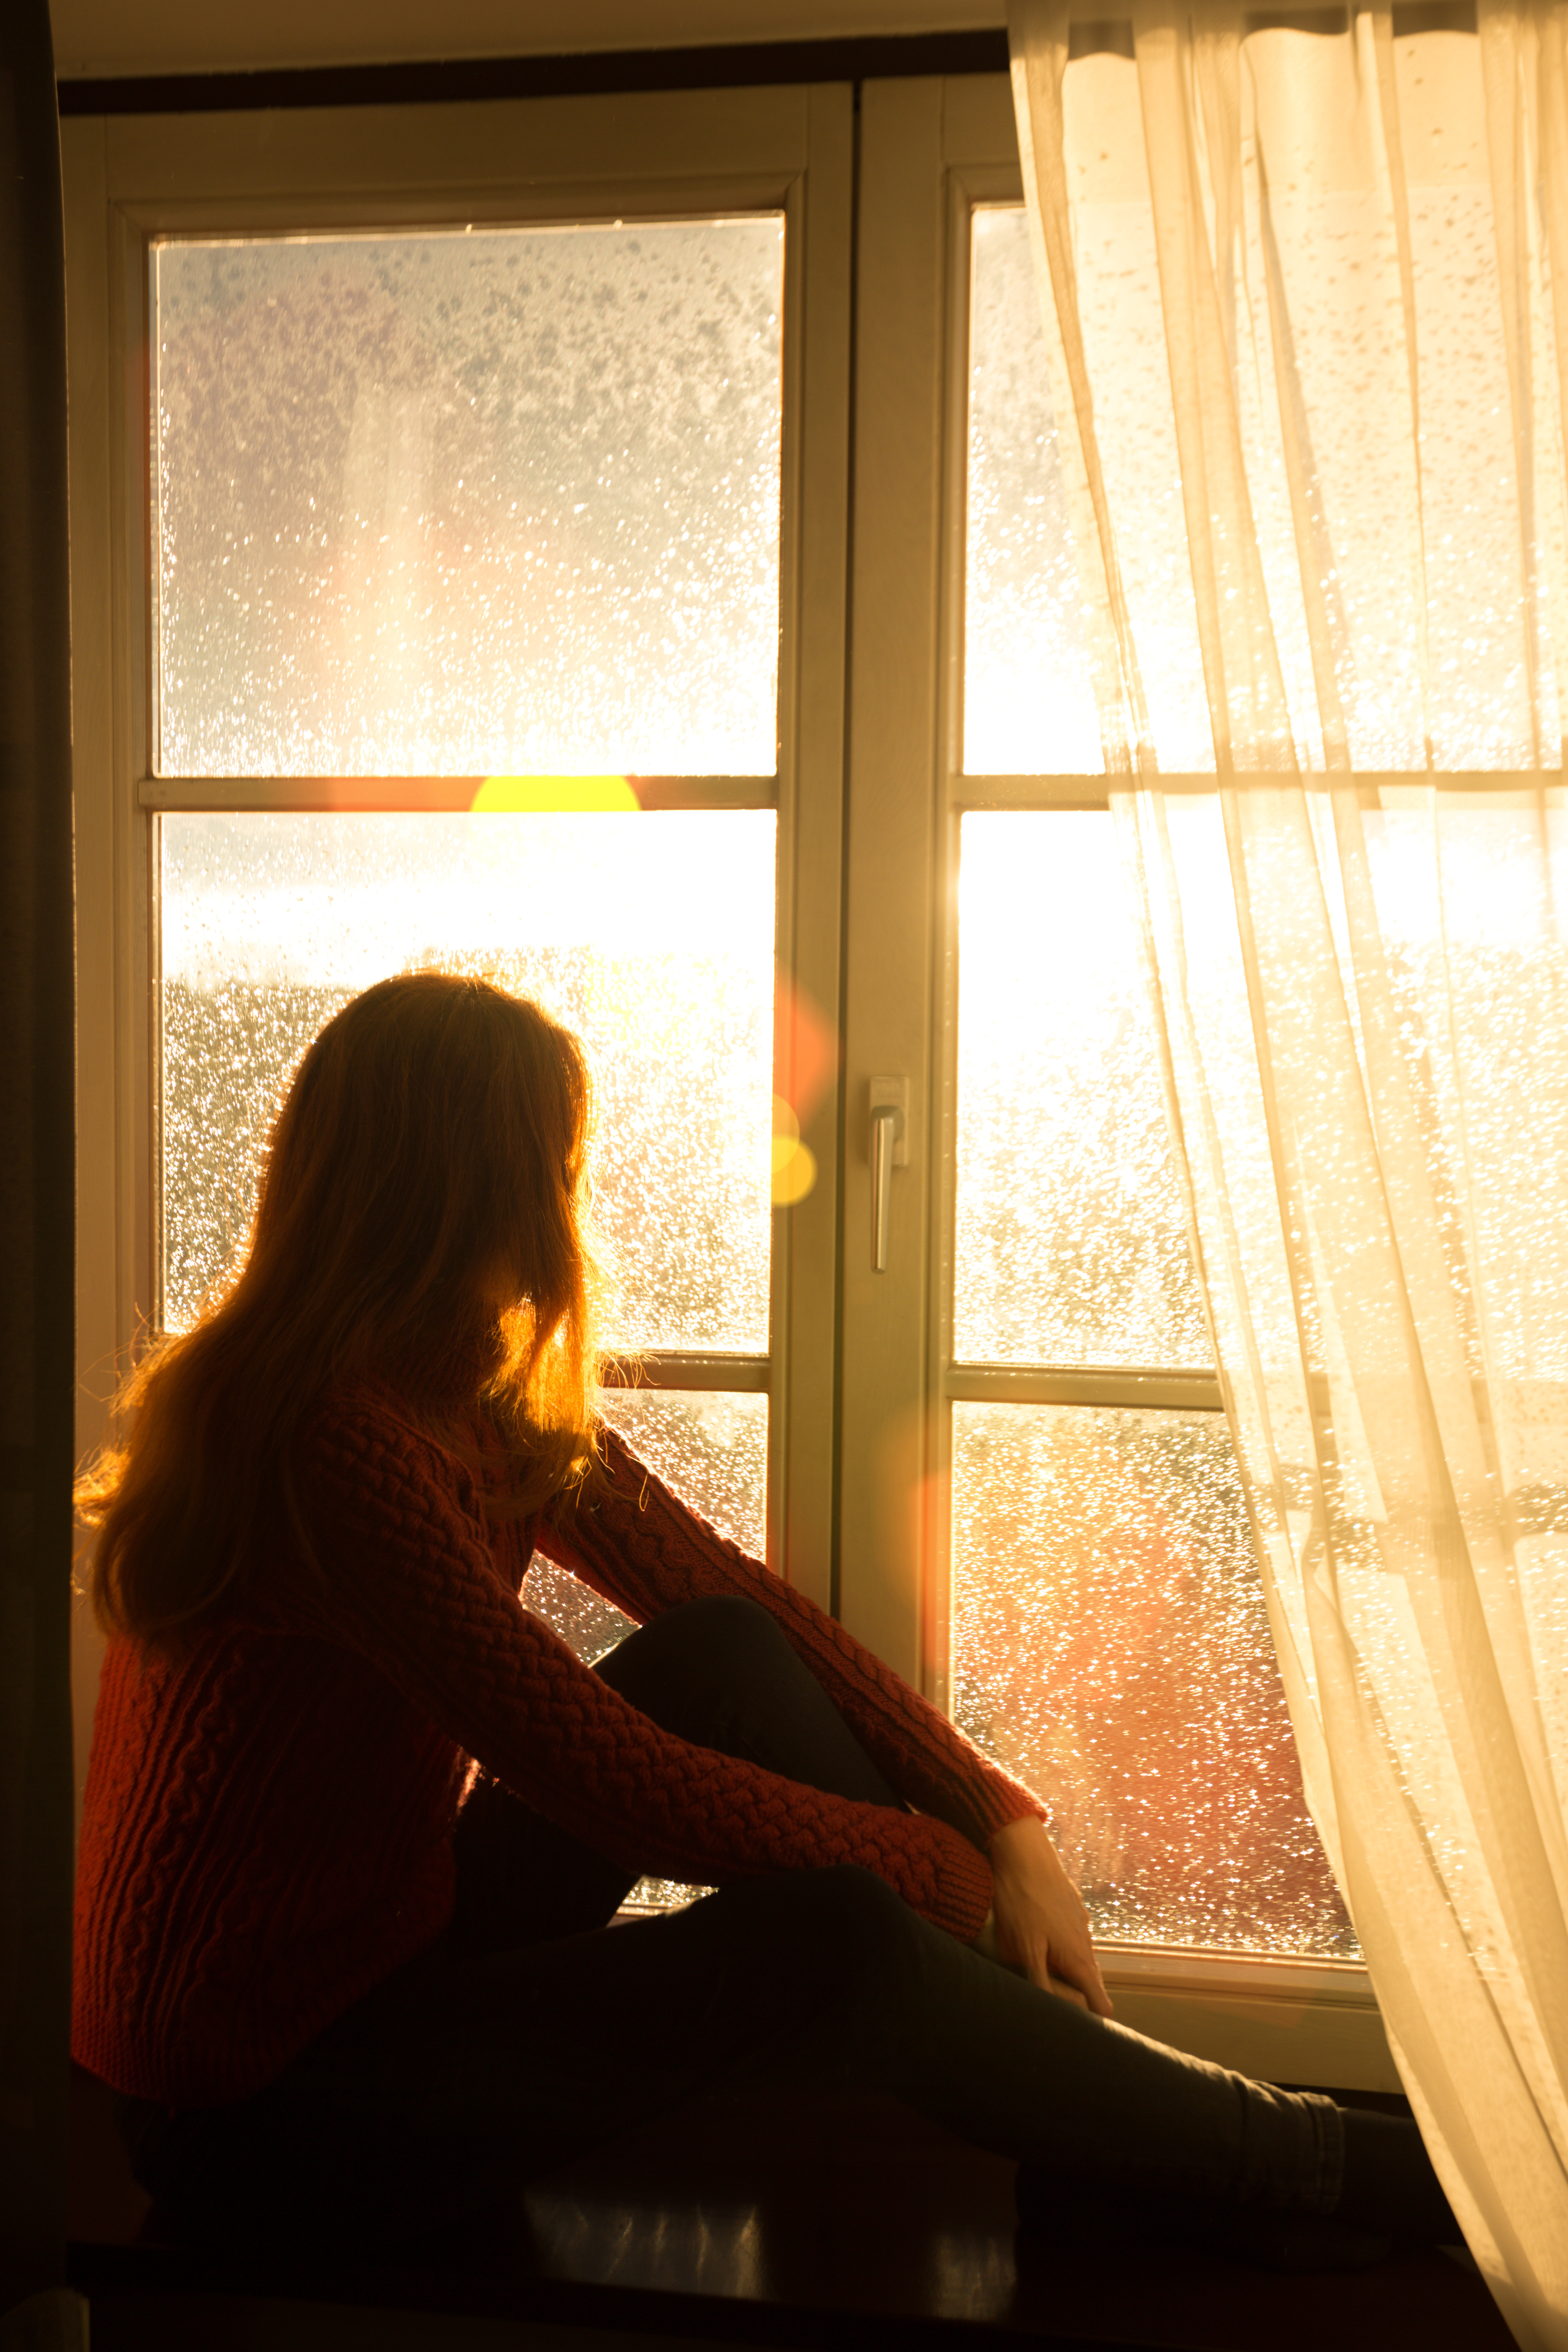 A woman sitting by her window - find St. Charles multiple sclerosis treatment today with Light Lounge.